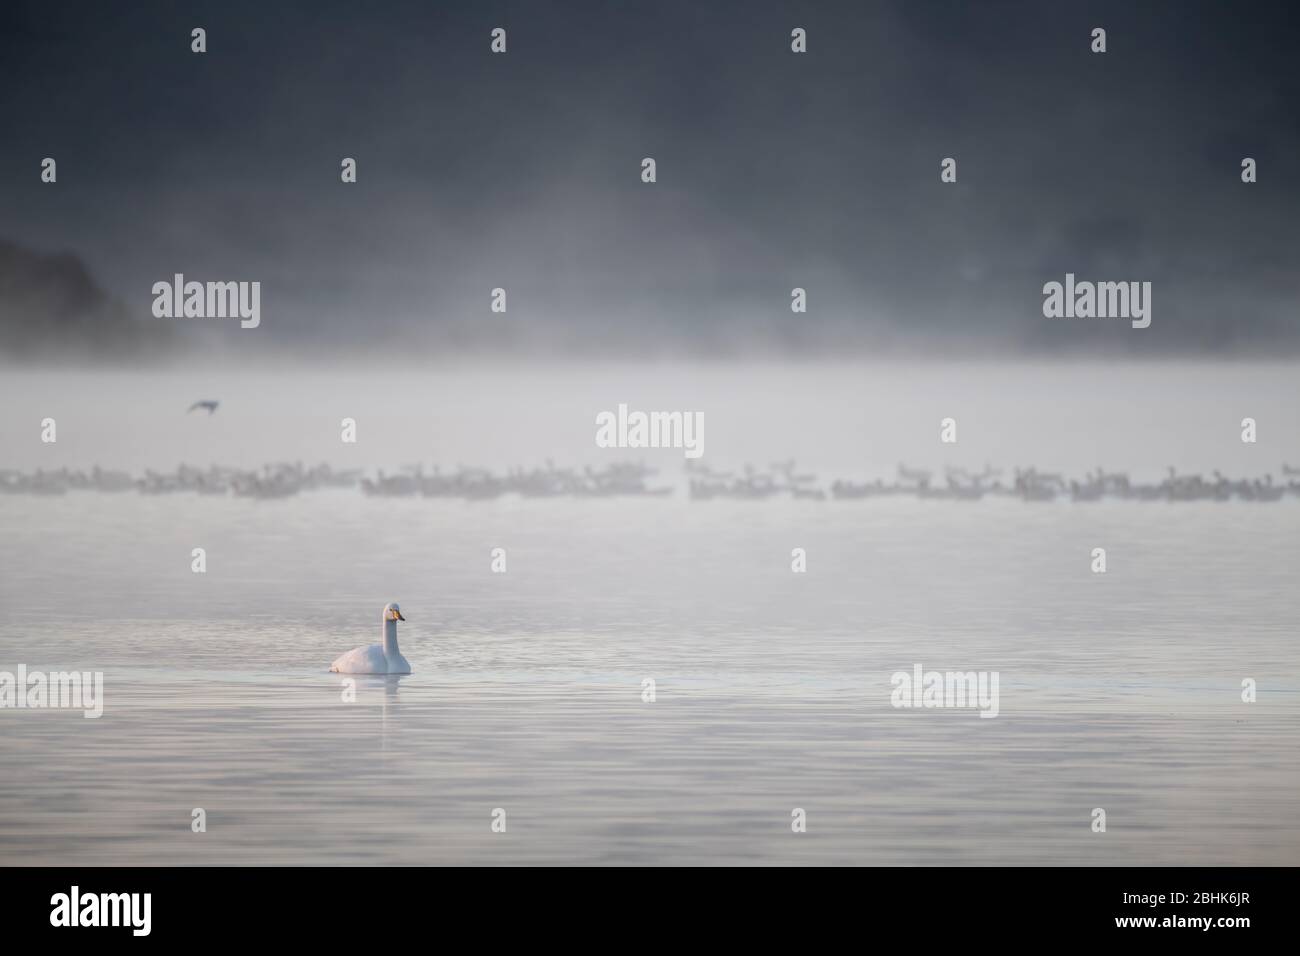 Whooper swan (Cygnus cygnus) swimming past a group of pink footed geese (Anser brachyrhynchus) with a misty loch in the background. Stock Photo